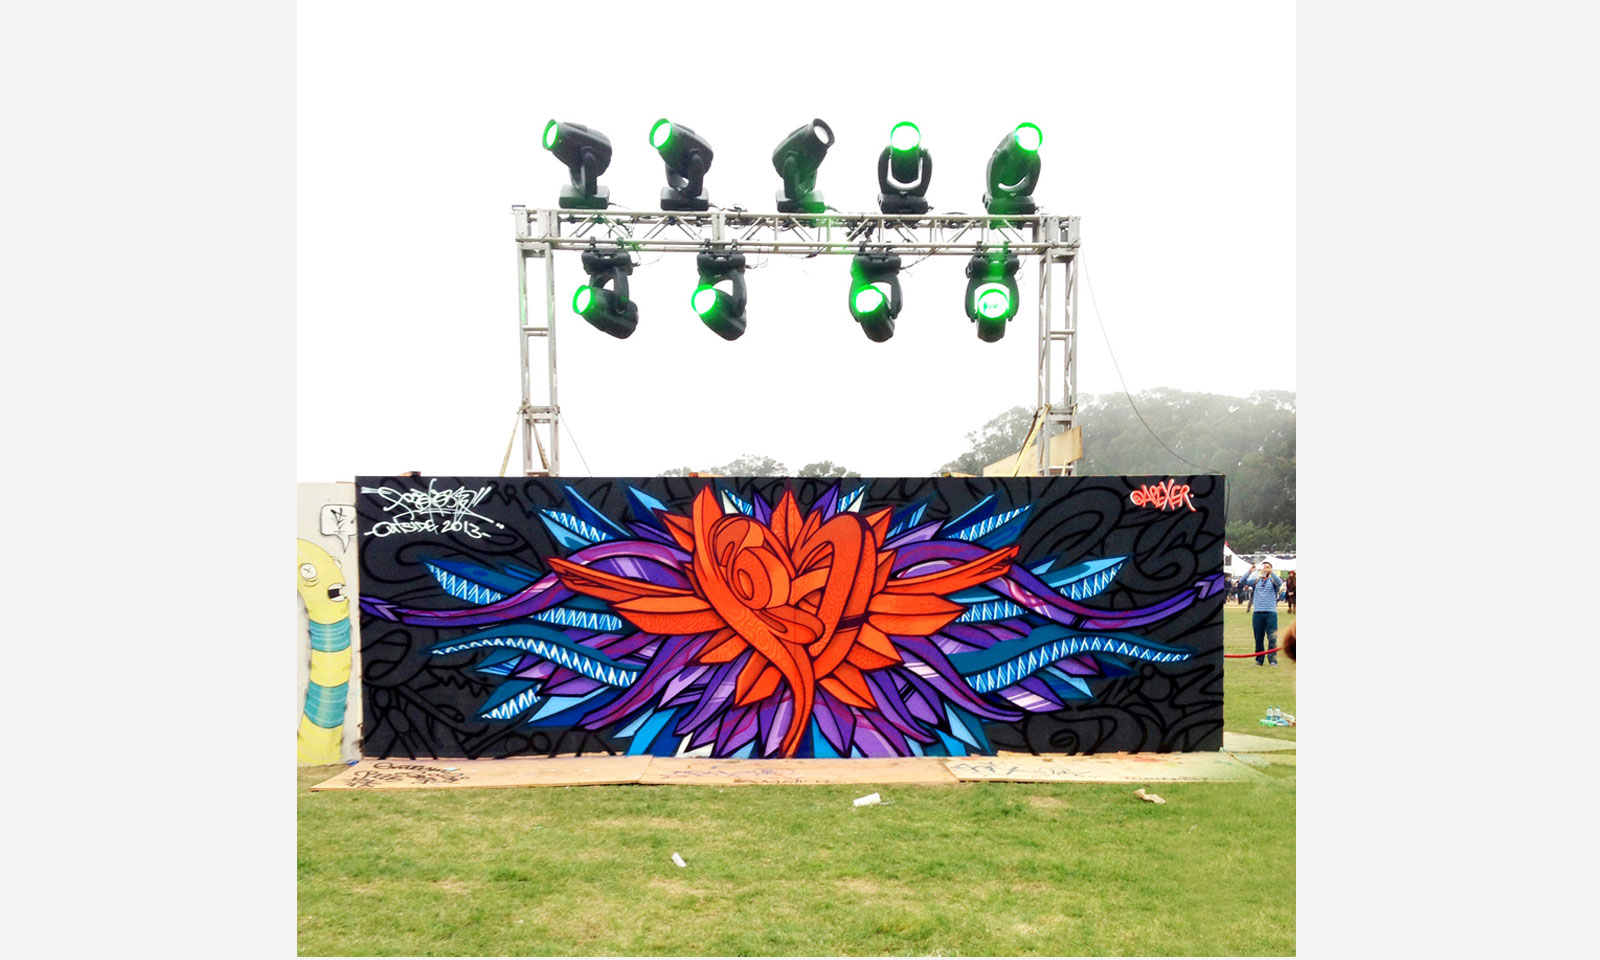 Mural created by Apexer at Outsidelands Music Festival, San Francisco, 2013